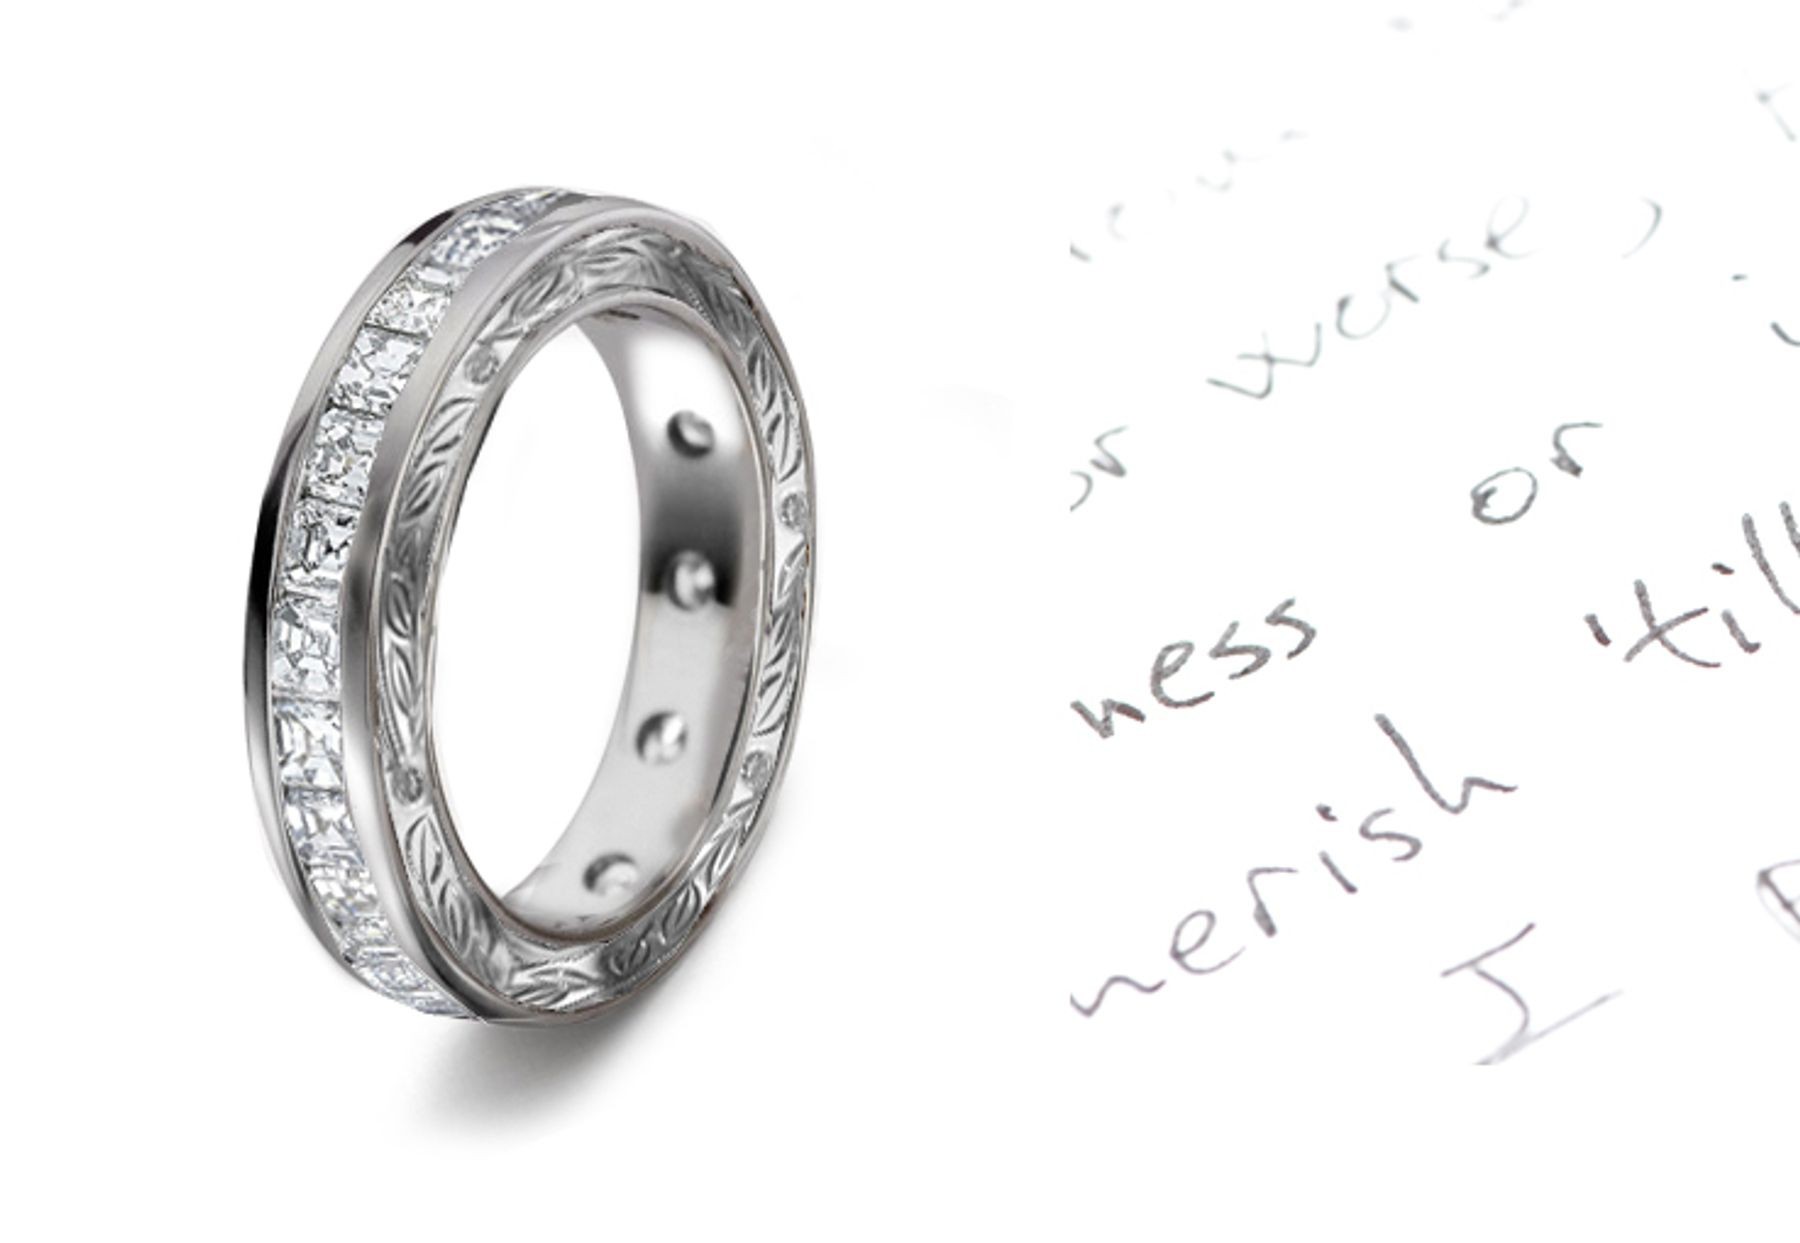 Evoking A Dazzling Star: Twinkling Asscher Cut Diamonds are Channel Set with Scribed Motifs on Anniversary Band Sides